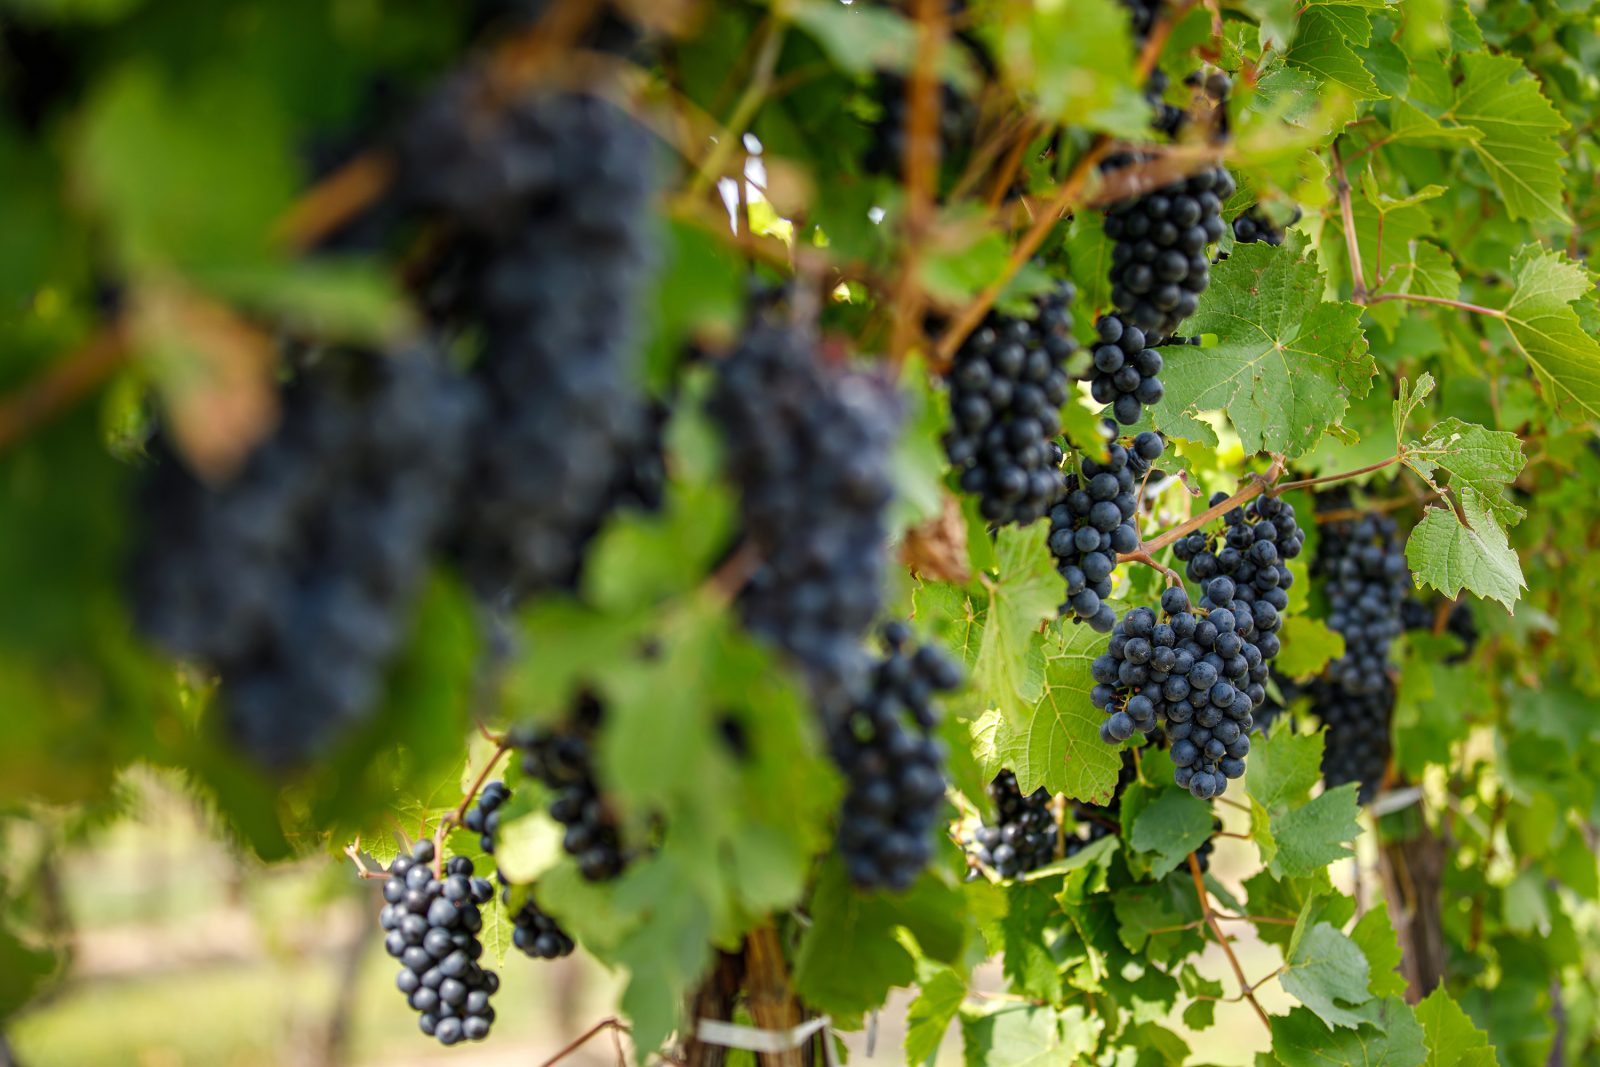 Bunches of red wine grapes hanging on a vine.